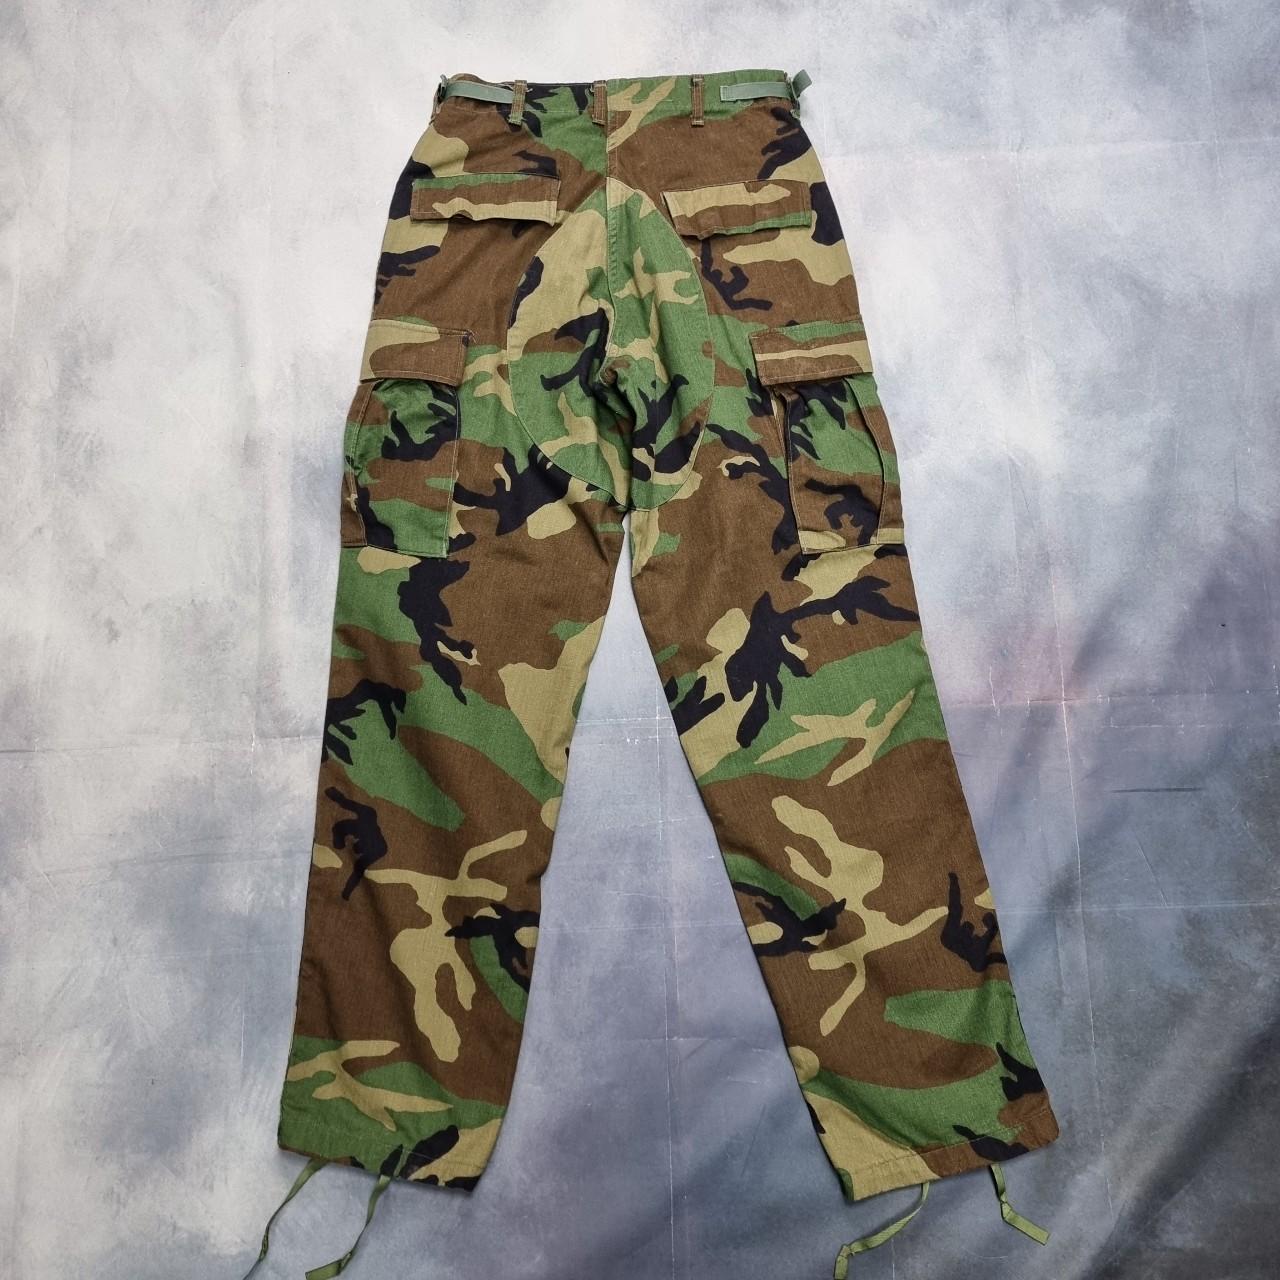 Vintage 1994 US Army issued woodland camouflage... - Depop